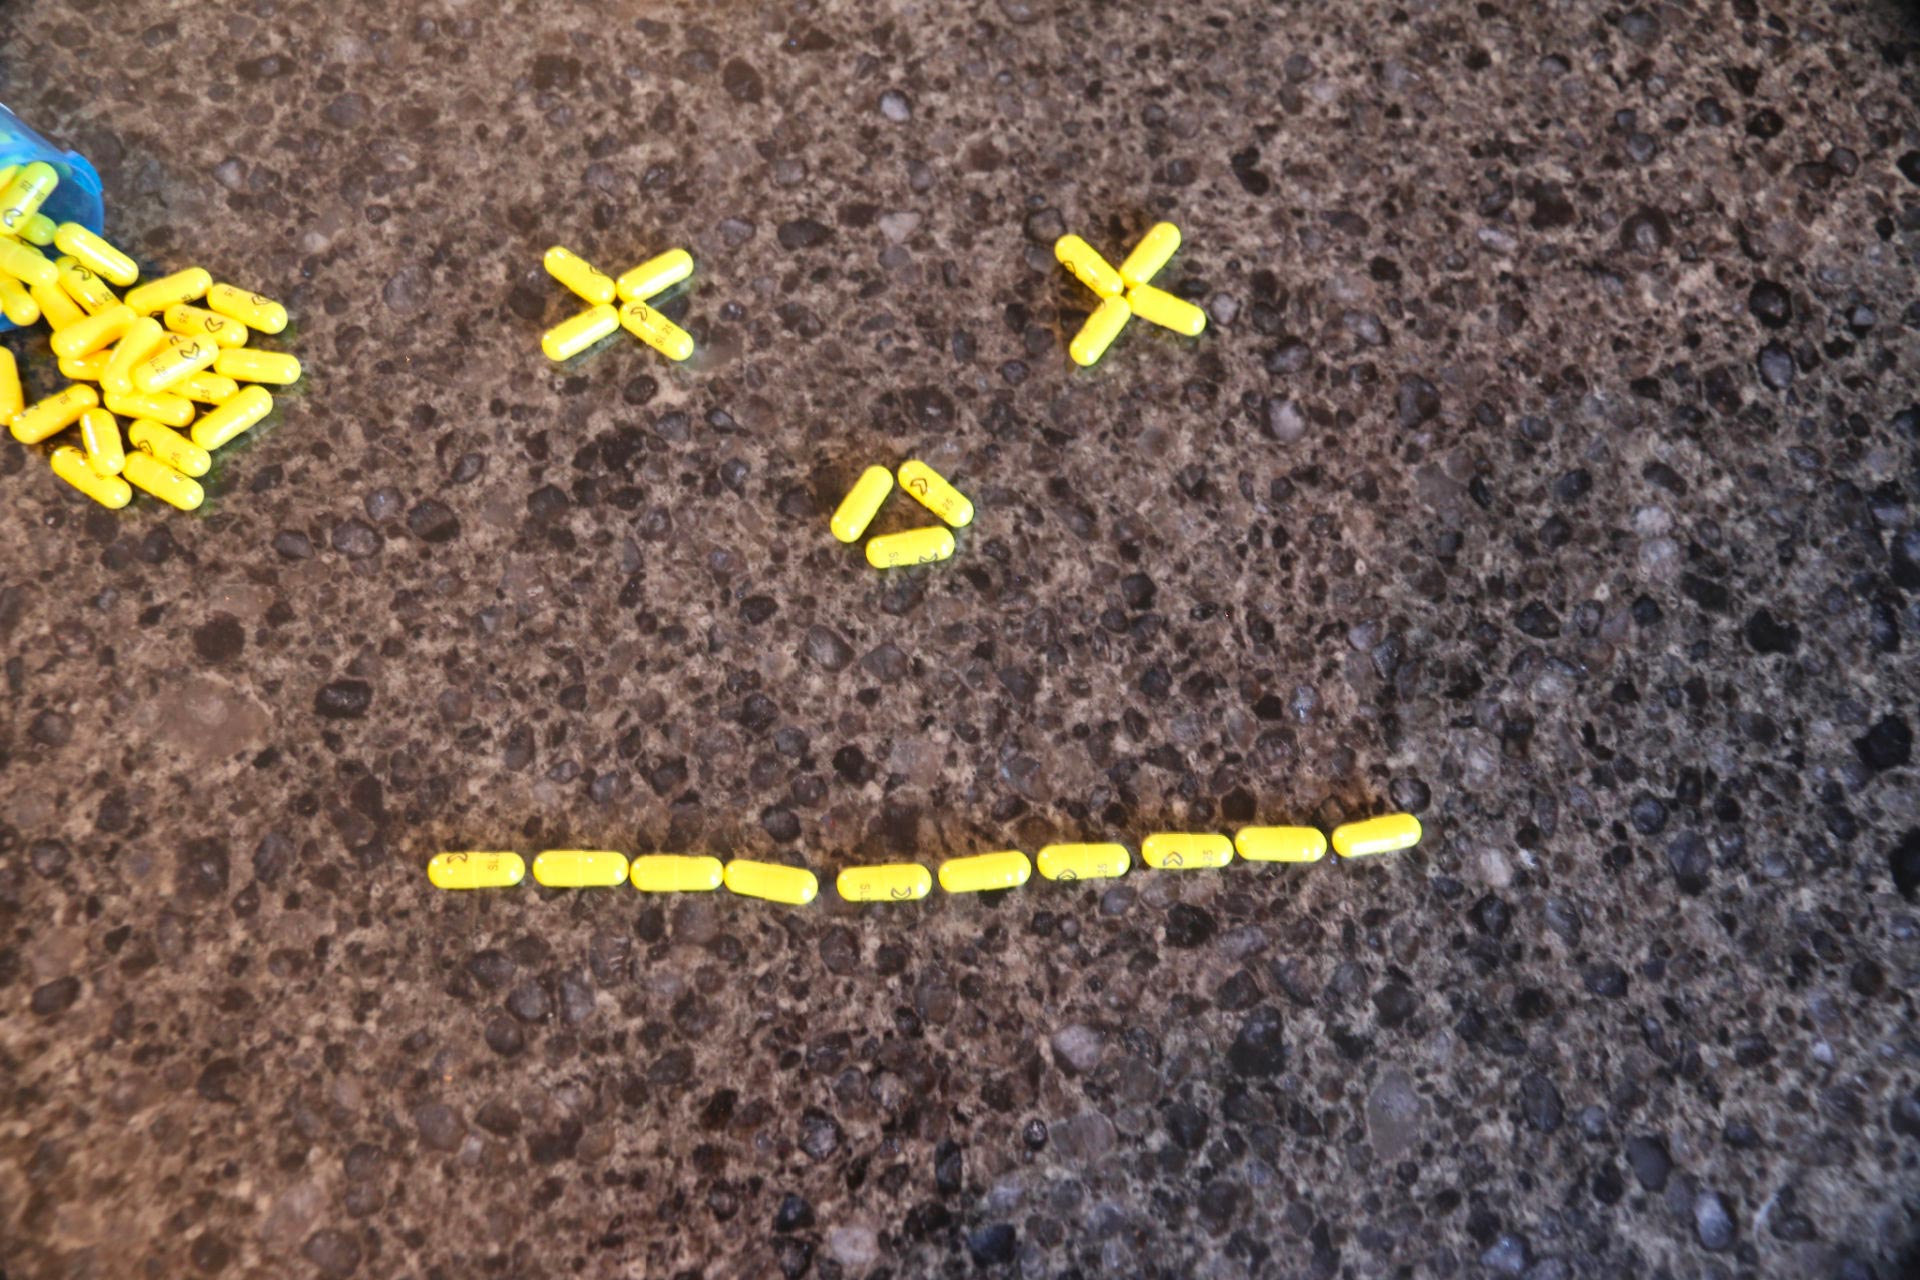 Pills laid out to make unsmiling face with “x” for eyes, the numbing effect of psychiatric meds